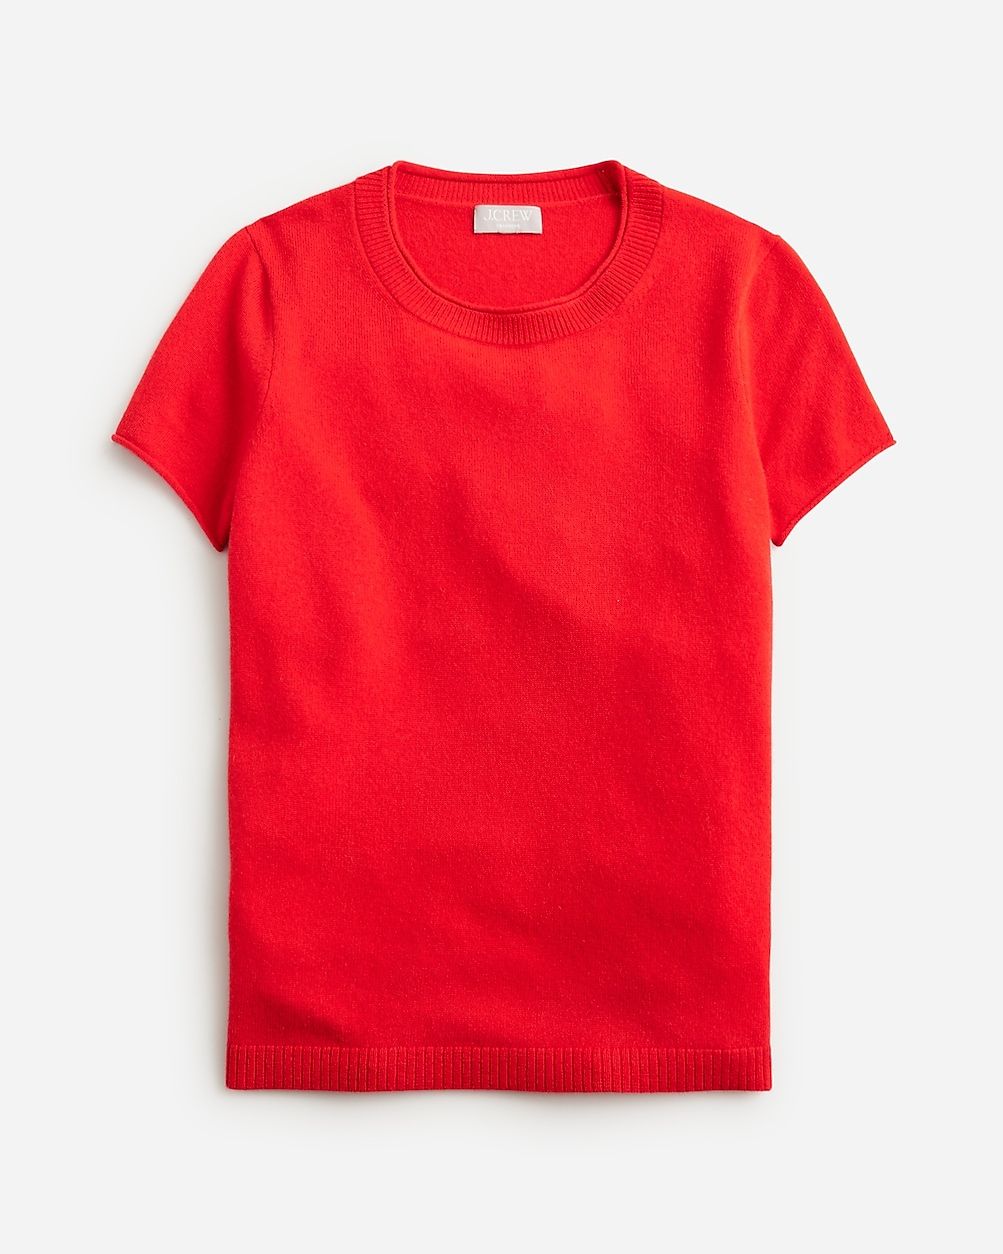 Cashmere relaxed T-shirt | J.Crew US